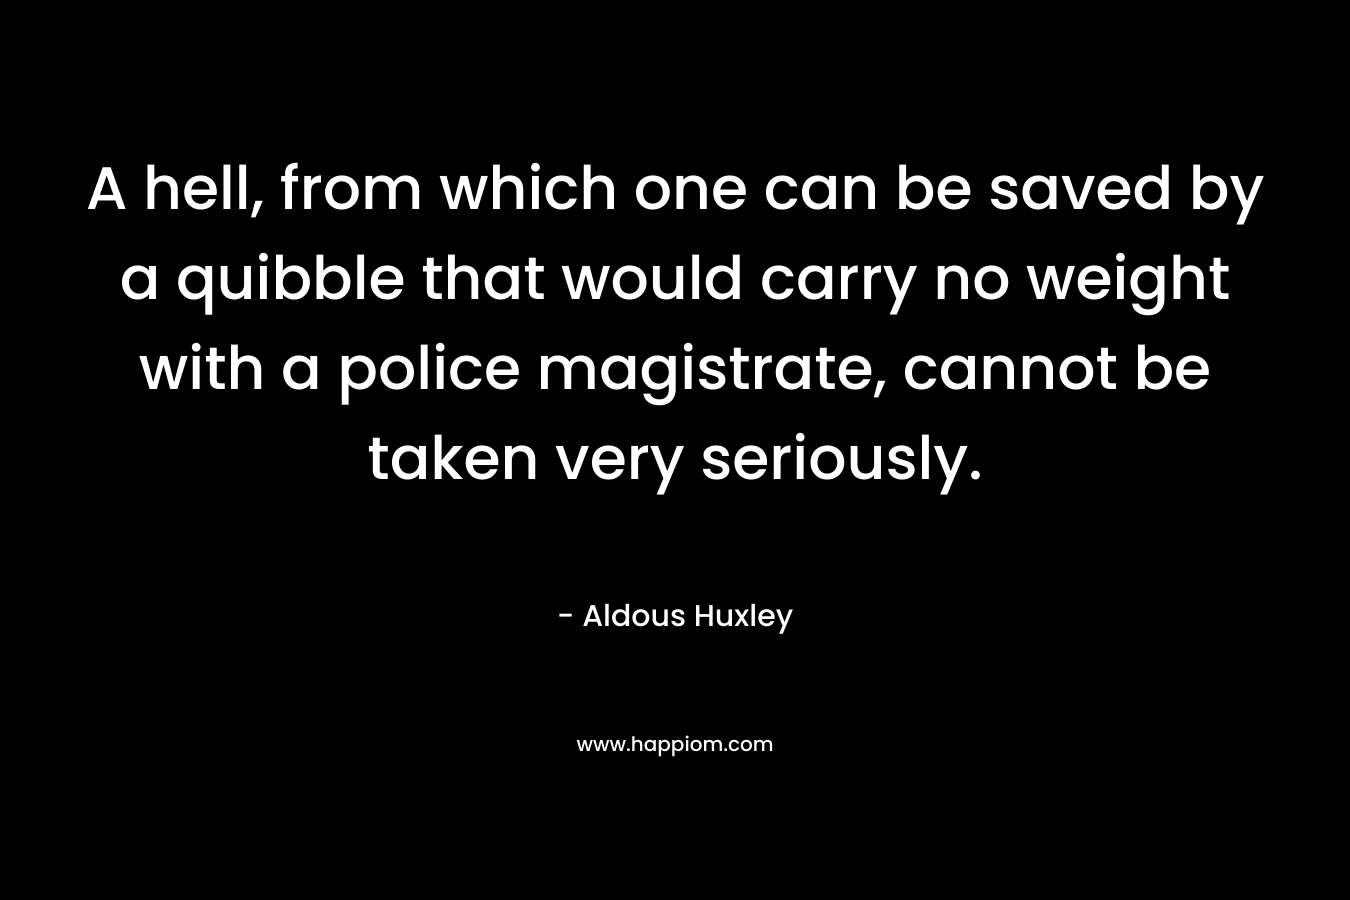 A hell, from which one can be saved by a quibble that would carry no weight with a police magistrate, cannot be taken very seriously. – Aldous Huxley